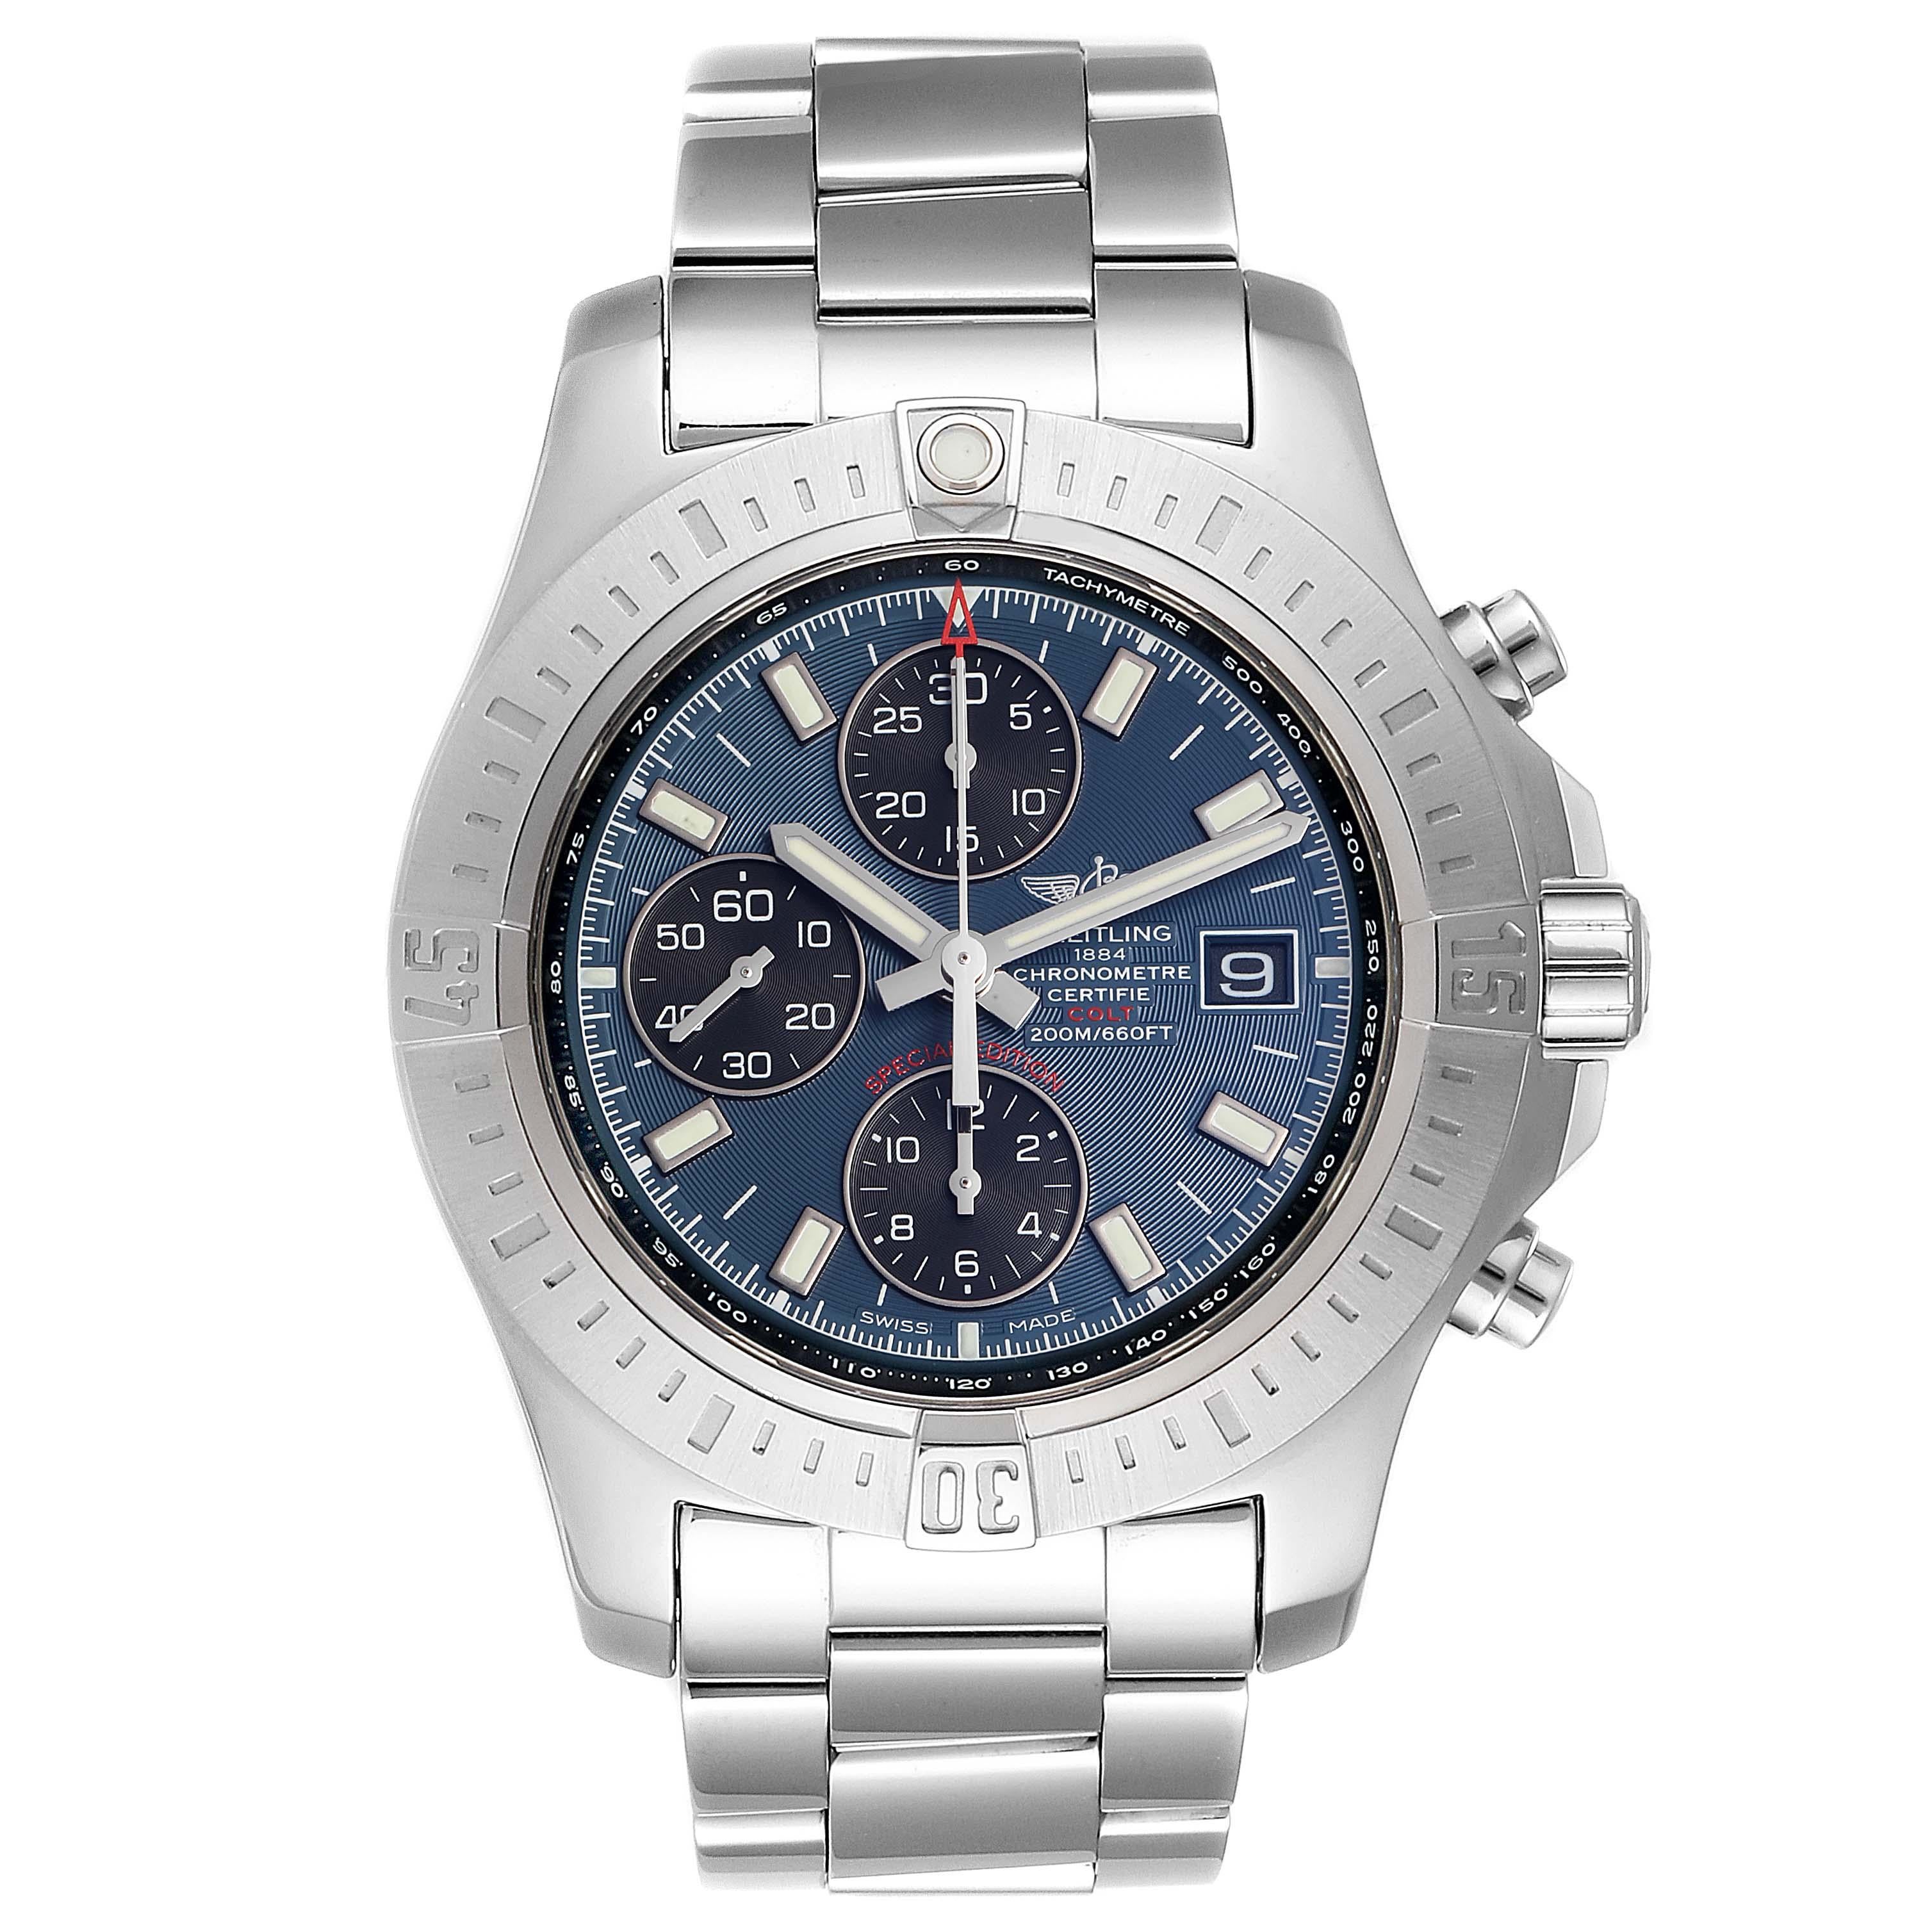 Breitling Colt Blue Dial Automatic Chronograph Steel Mens Watch A13388. Automatic self-winding chronometer movement. Stainless steel case 44mm in diameter. Breitling logo on a crown. Stainless steel unidirectional rotating bezel. 0-60 elapsed-time.